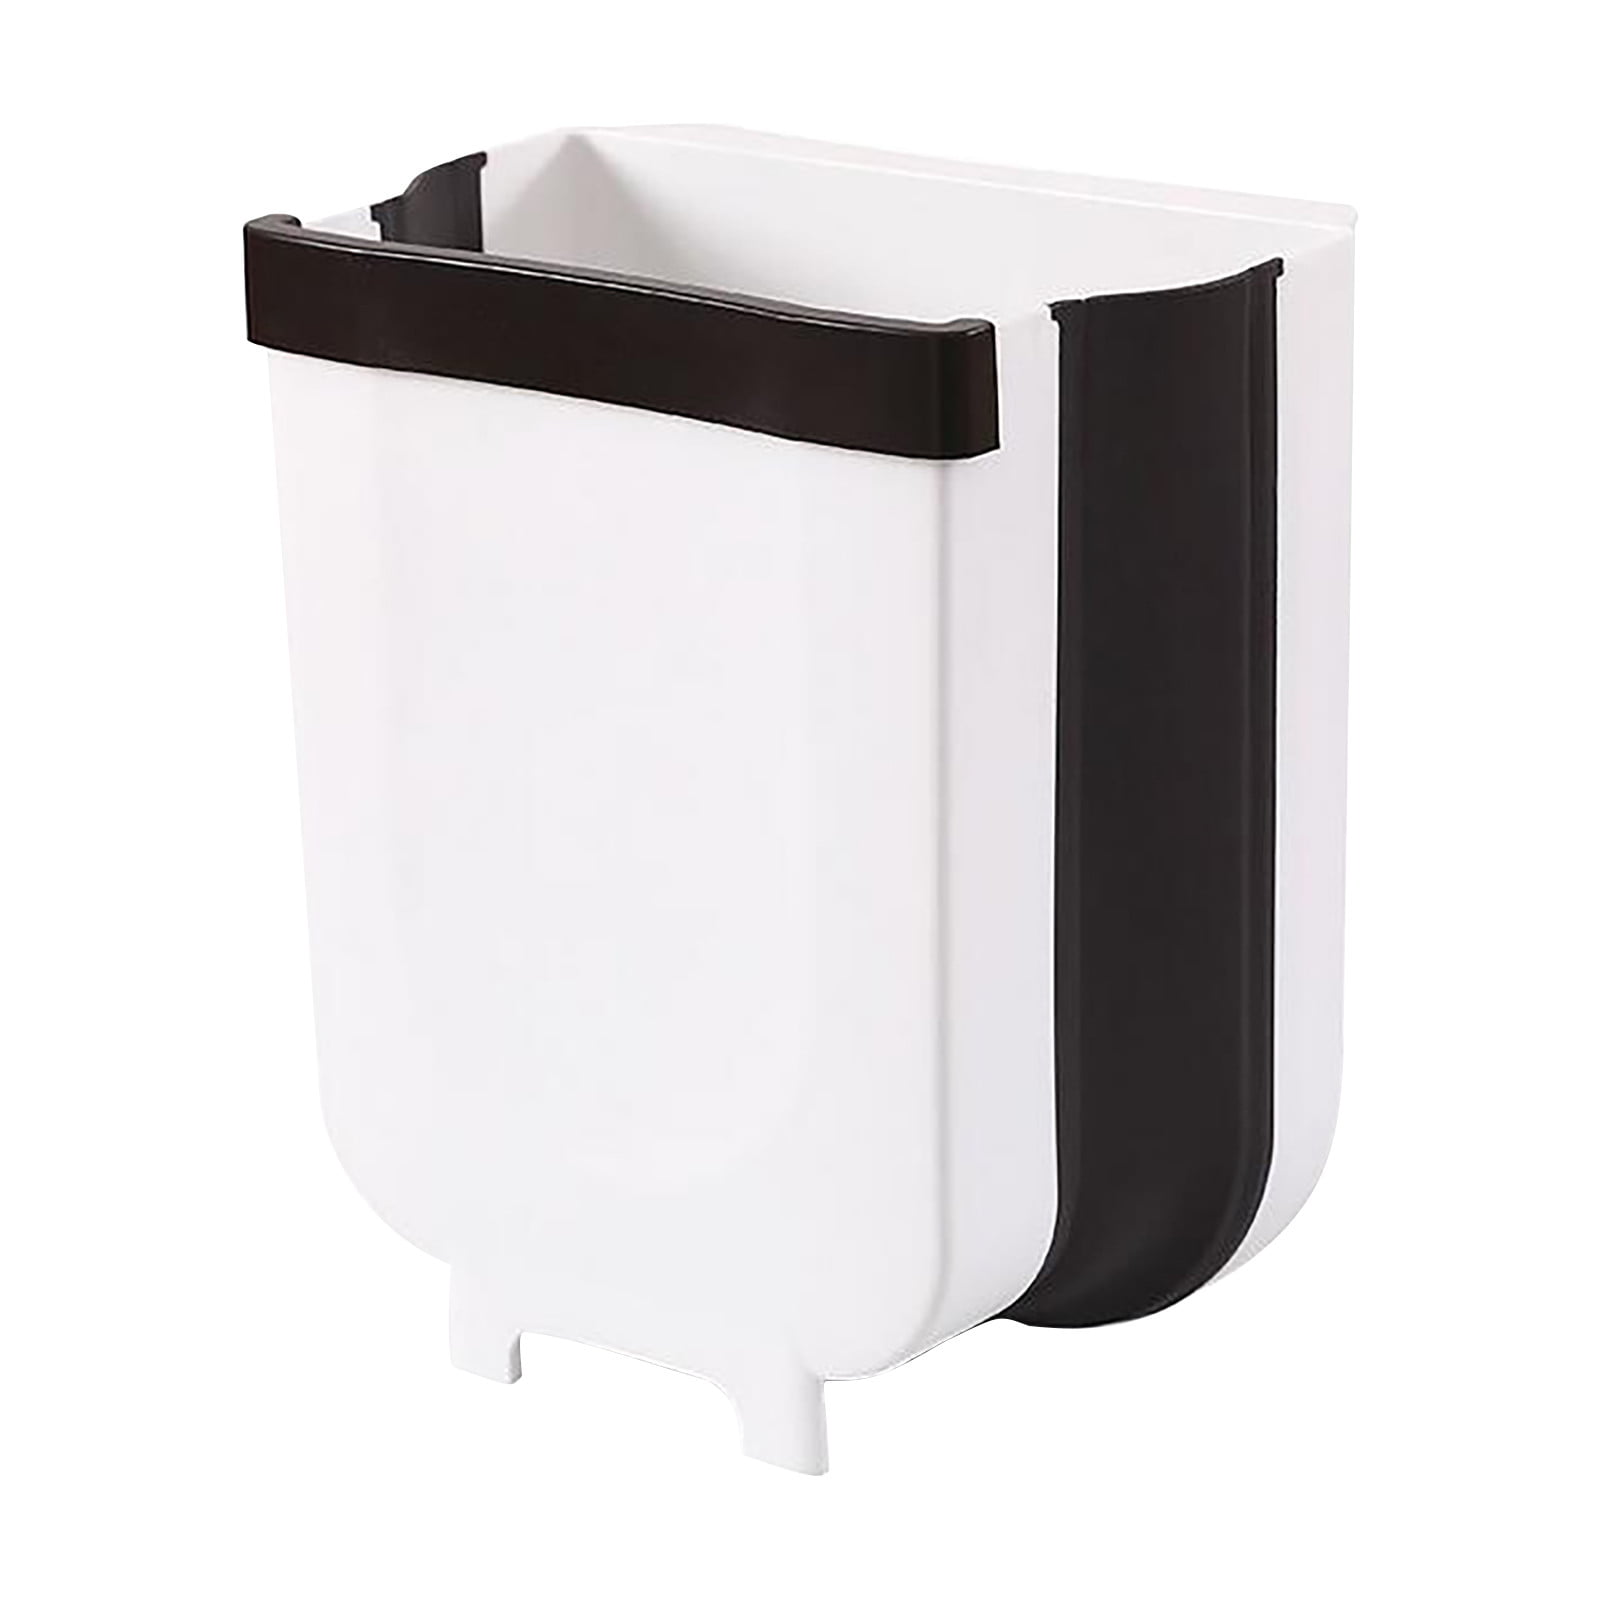 Home Wall Mounted Folding Waste Bin Kitchen Cabinet Door Hanging Trash Can 